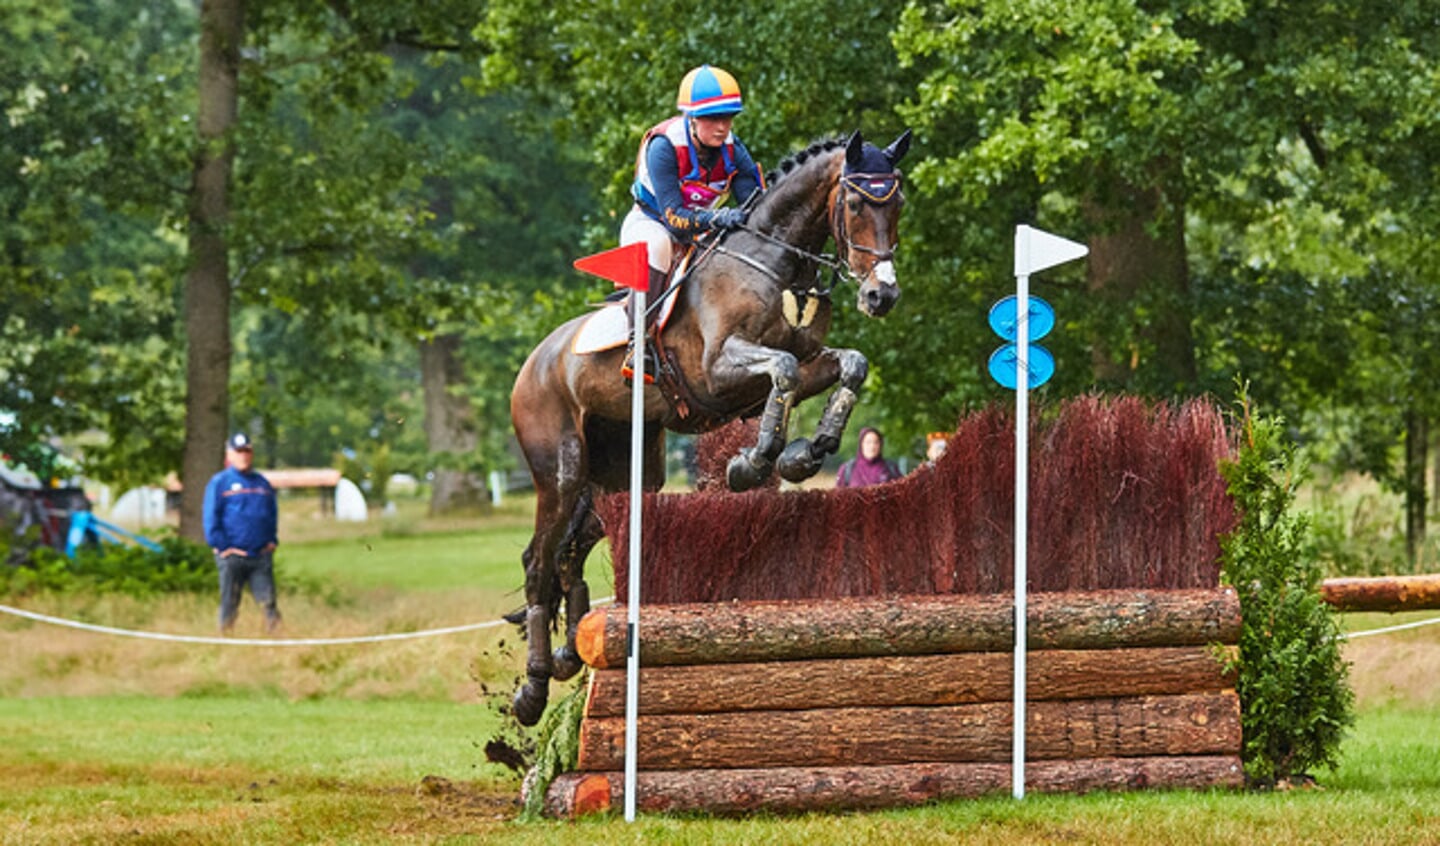 ID00456
Rider: Mylène Spaak
Horse: King Canna
Year of Birth: 2007
Gender: Gelding
Studbook: ZANG
Sire: Amoroso van de Helle
Dam: 
Sire of Dam: Saros
Competition: FEI European Championship 2019
Discipline: Eventing - Cross Country
Class: CH-EU-Y-CCI3*-L
Date: 13 July 2019
Location: Maarsbergen
Country: The Netherlands